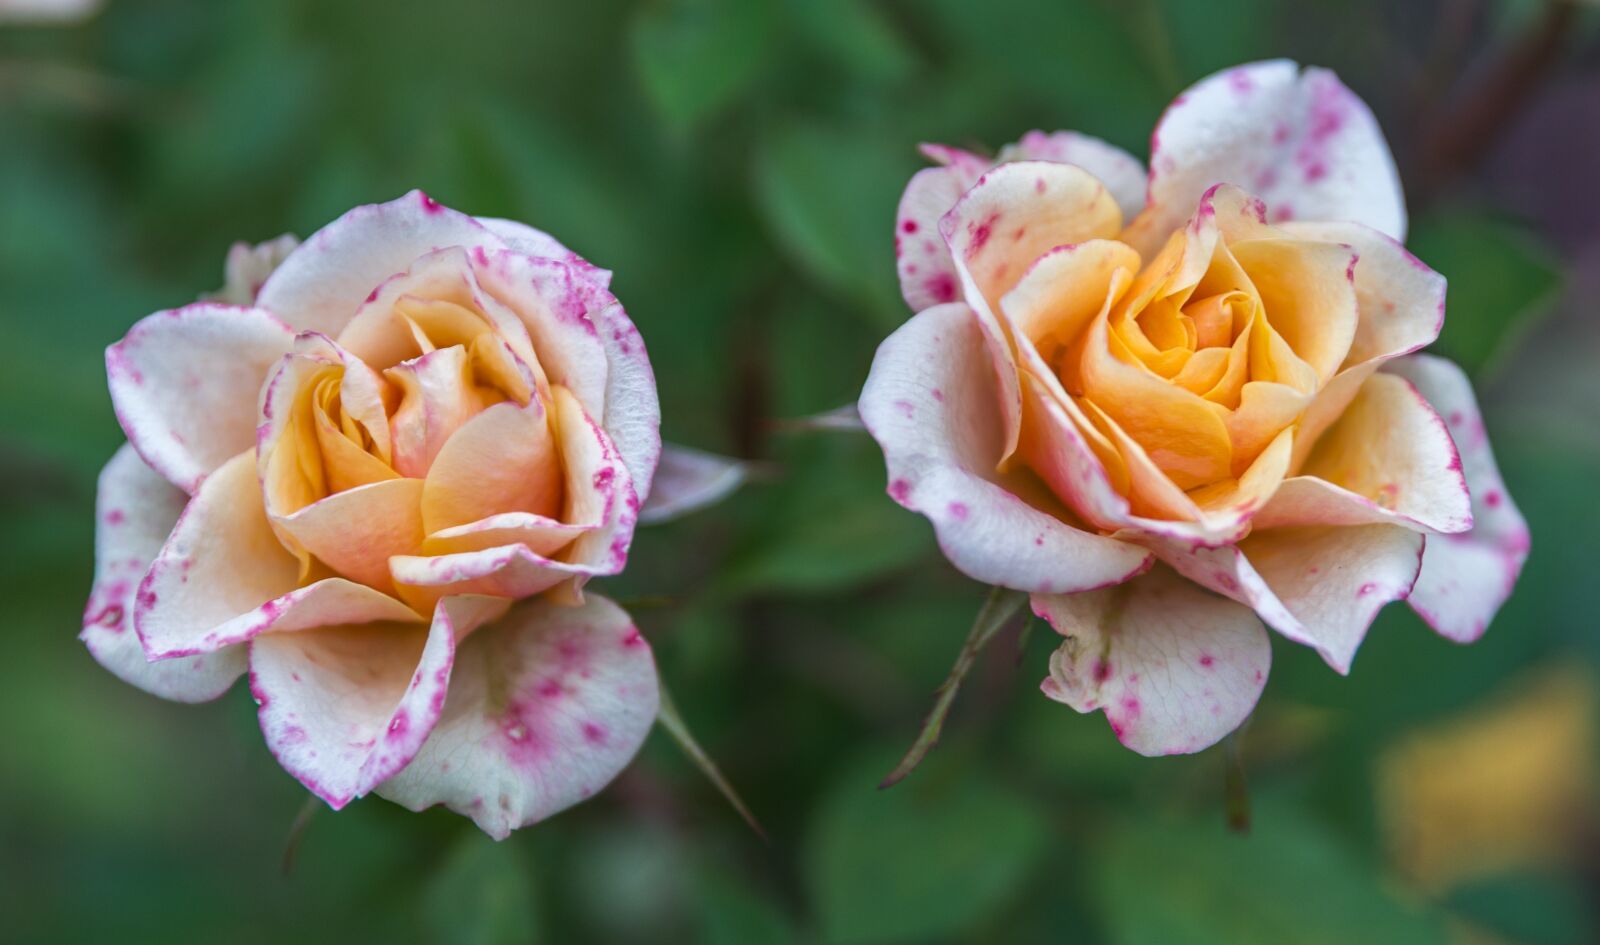 Sony a7R II sample photo. Flower, rose, nature photography